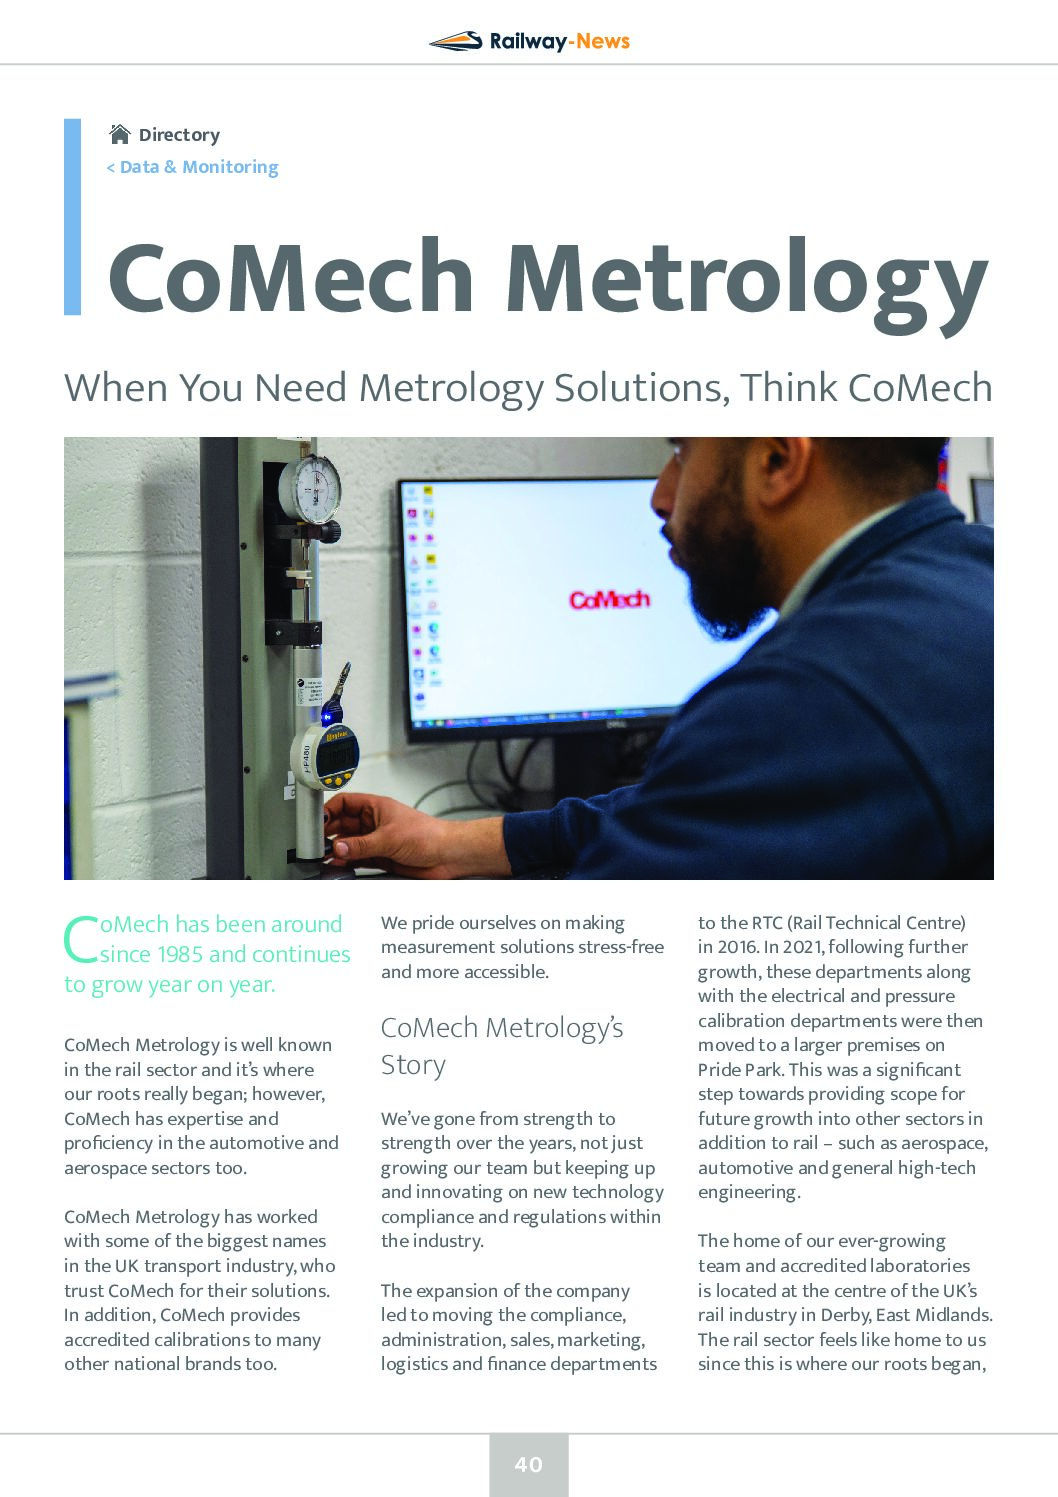 When You Need Metrology Solutions, Think CoMech